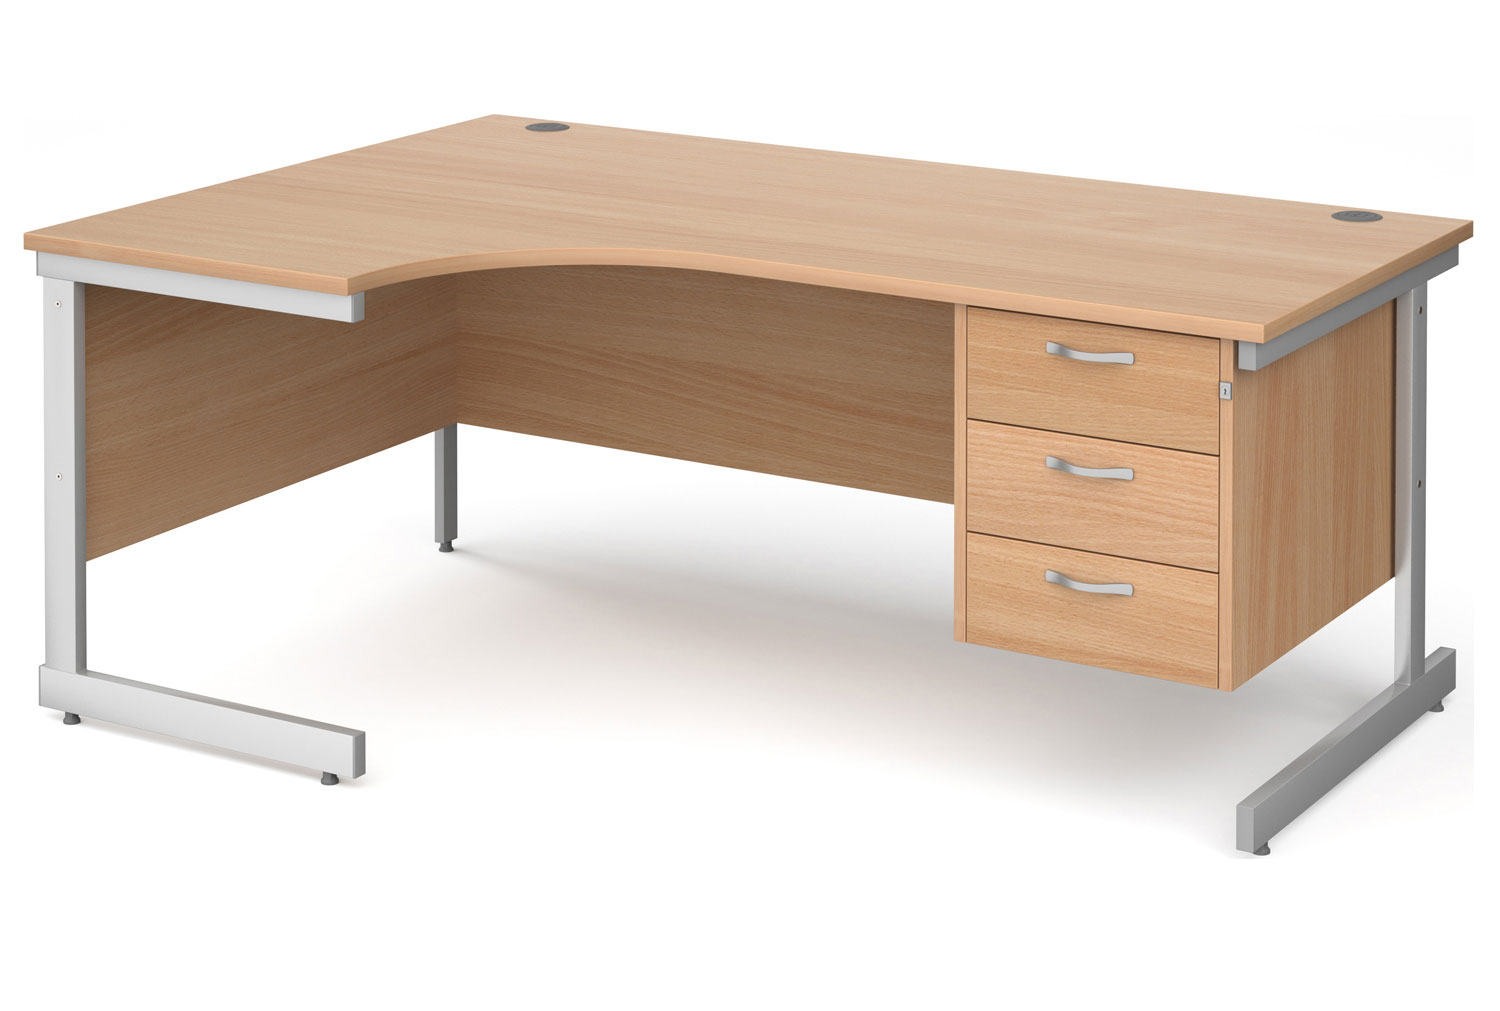 Tully I Left Hand Ergonomic Office Desk 3 Drawers, 180wx120/80dx73h (cm), Beech, Express Delivery